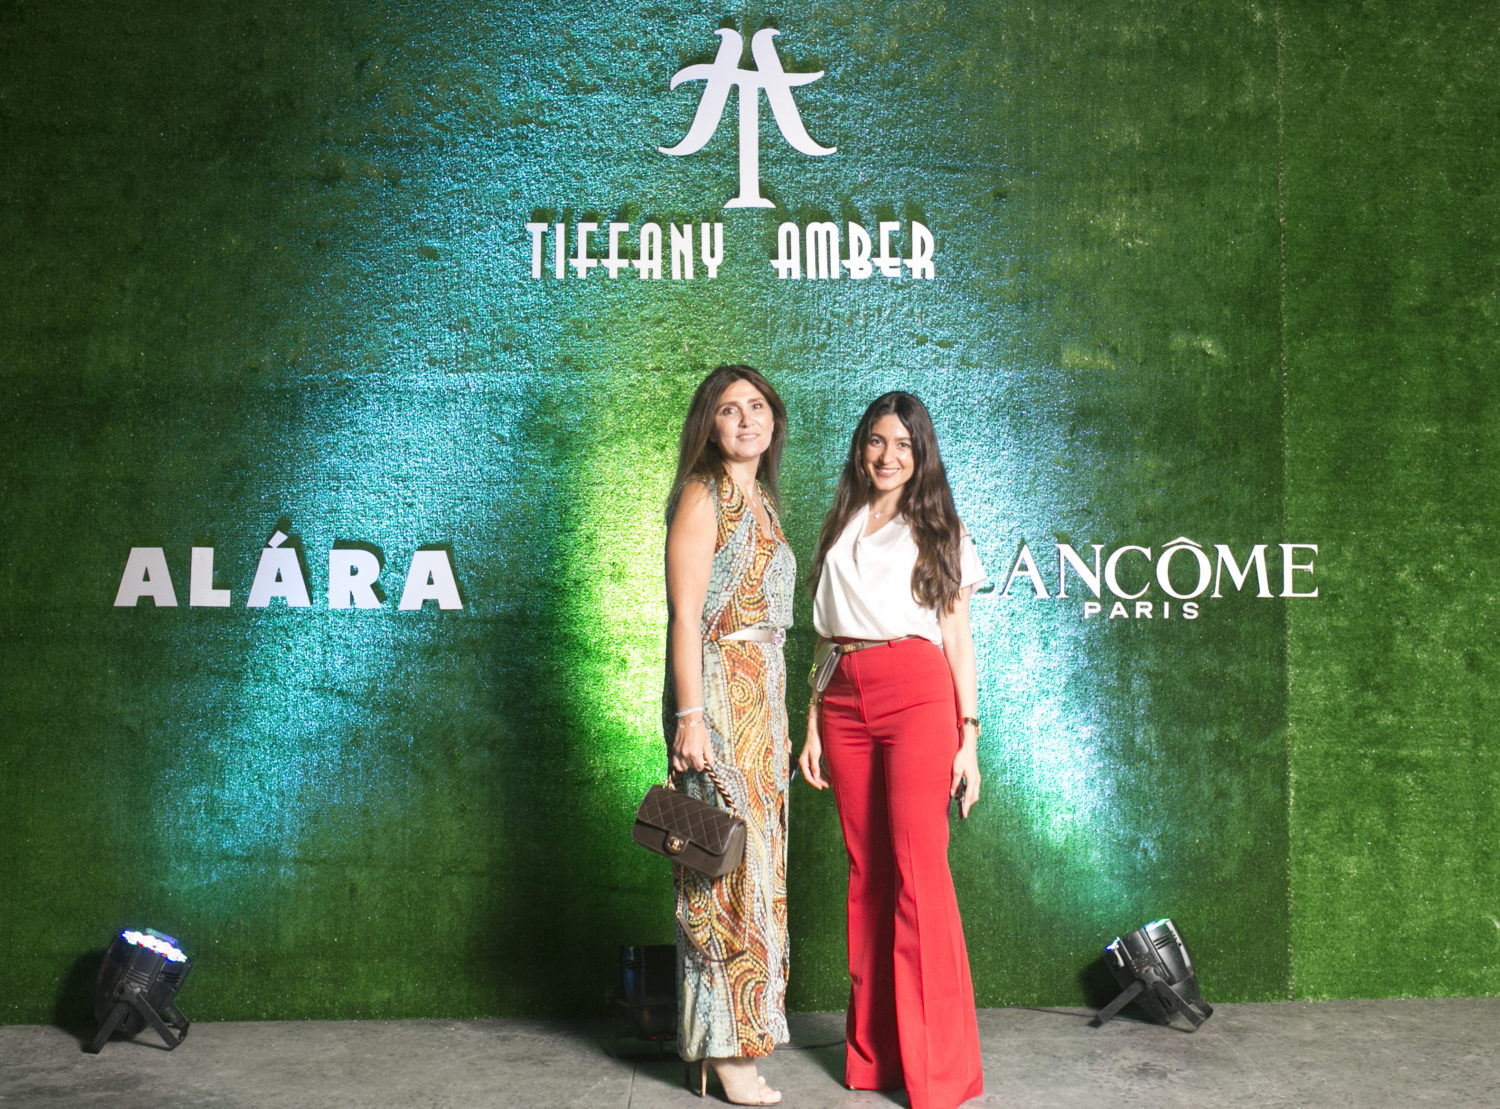 Tiffany Amber Celebrated Her 20th Anniversary at Alara, See all The Fun Red Carpet Moments You Missed!